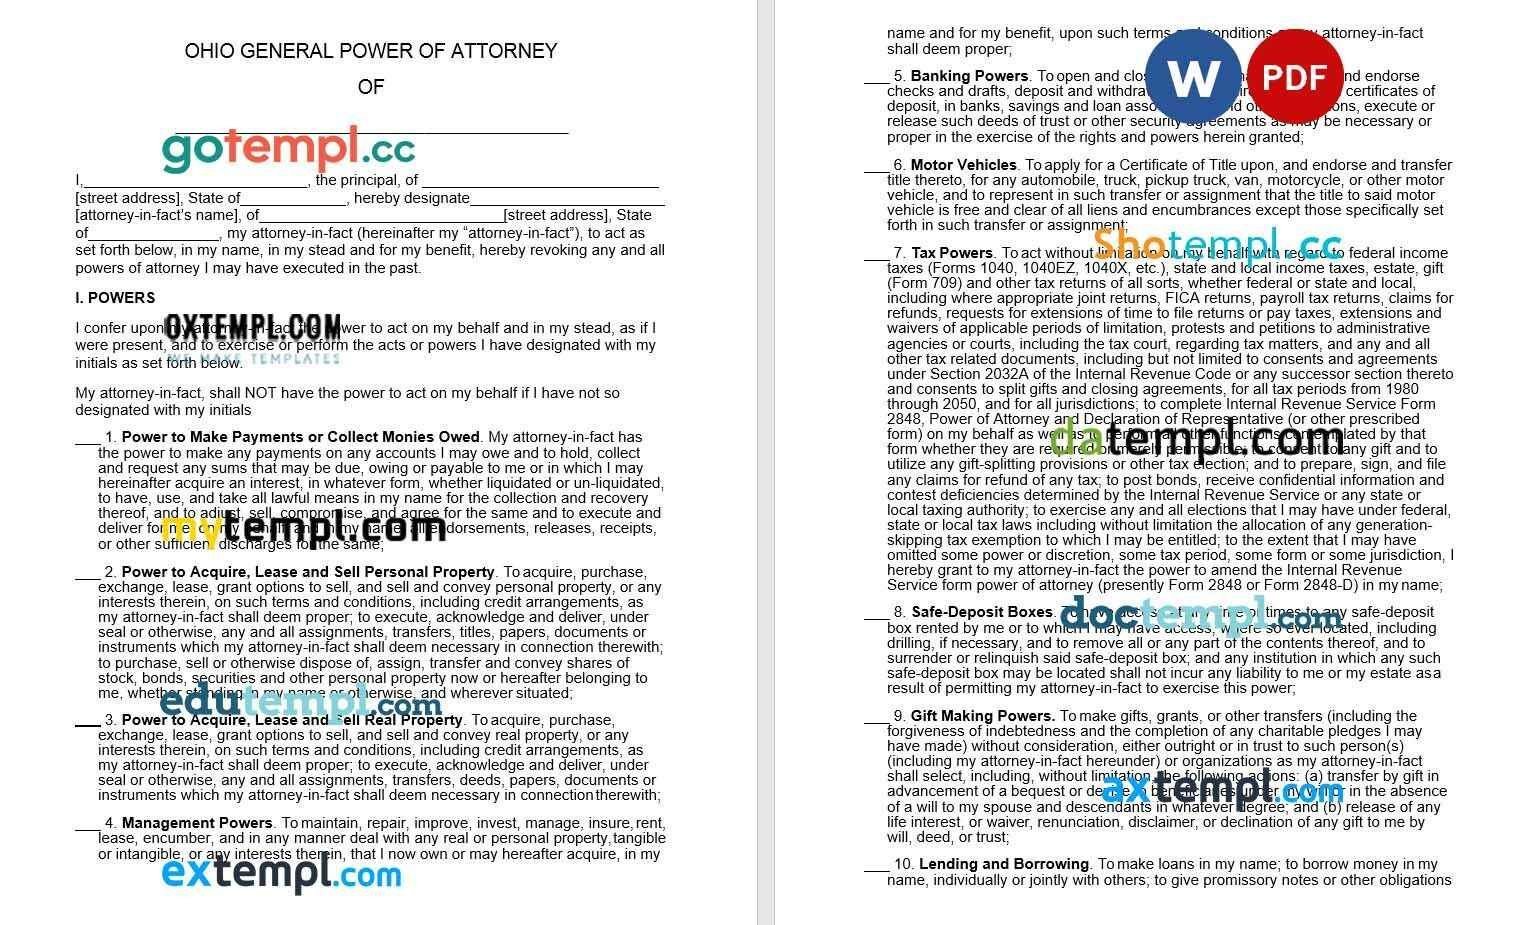 Ohio General Power of Attorney example, fully editable